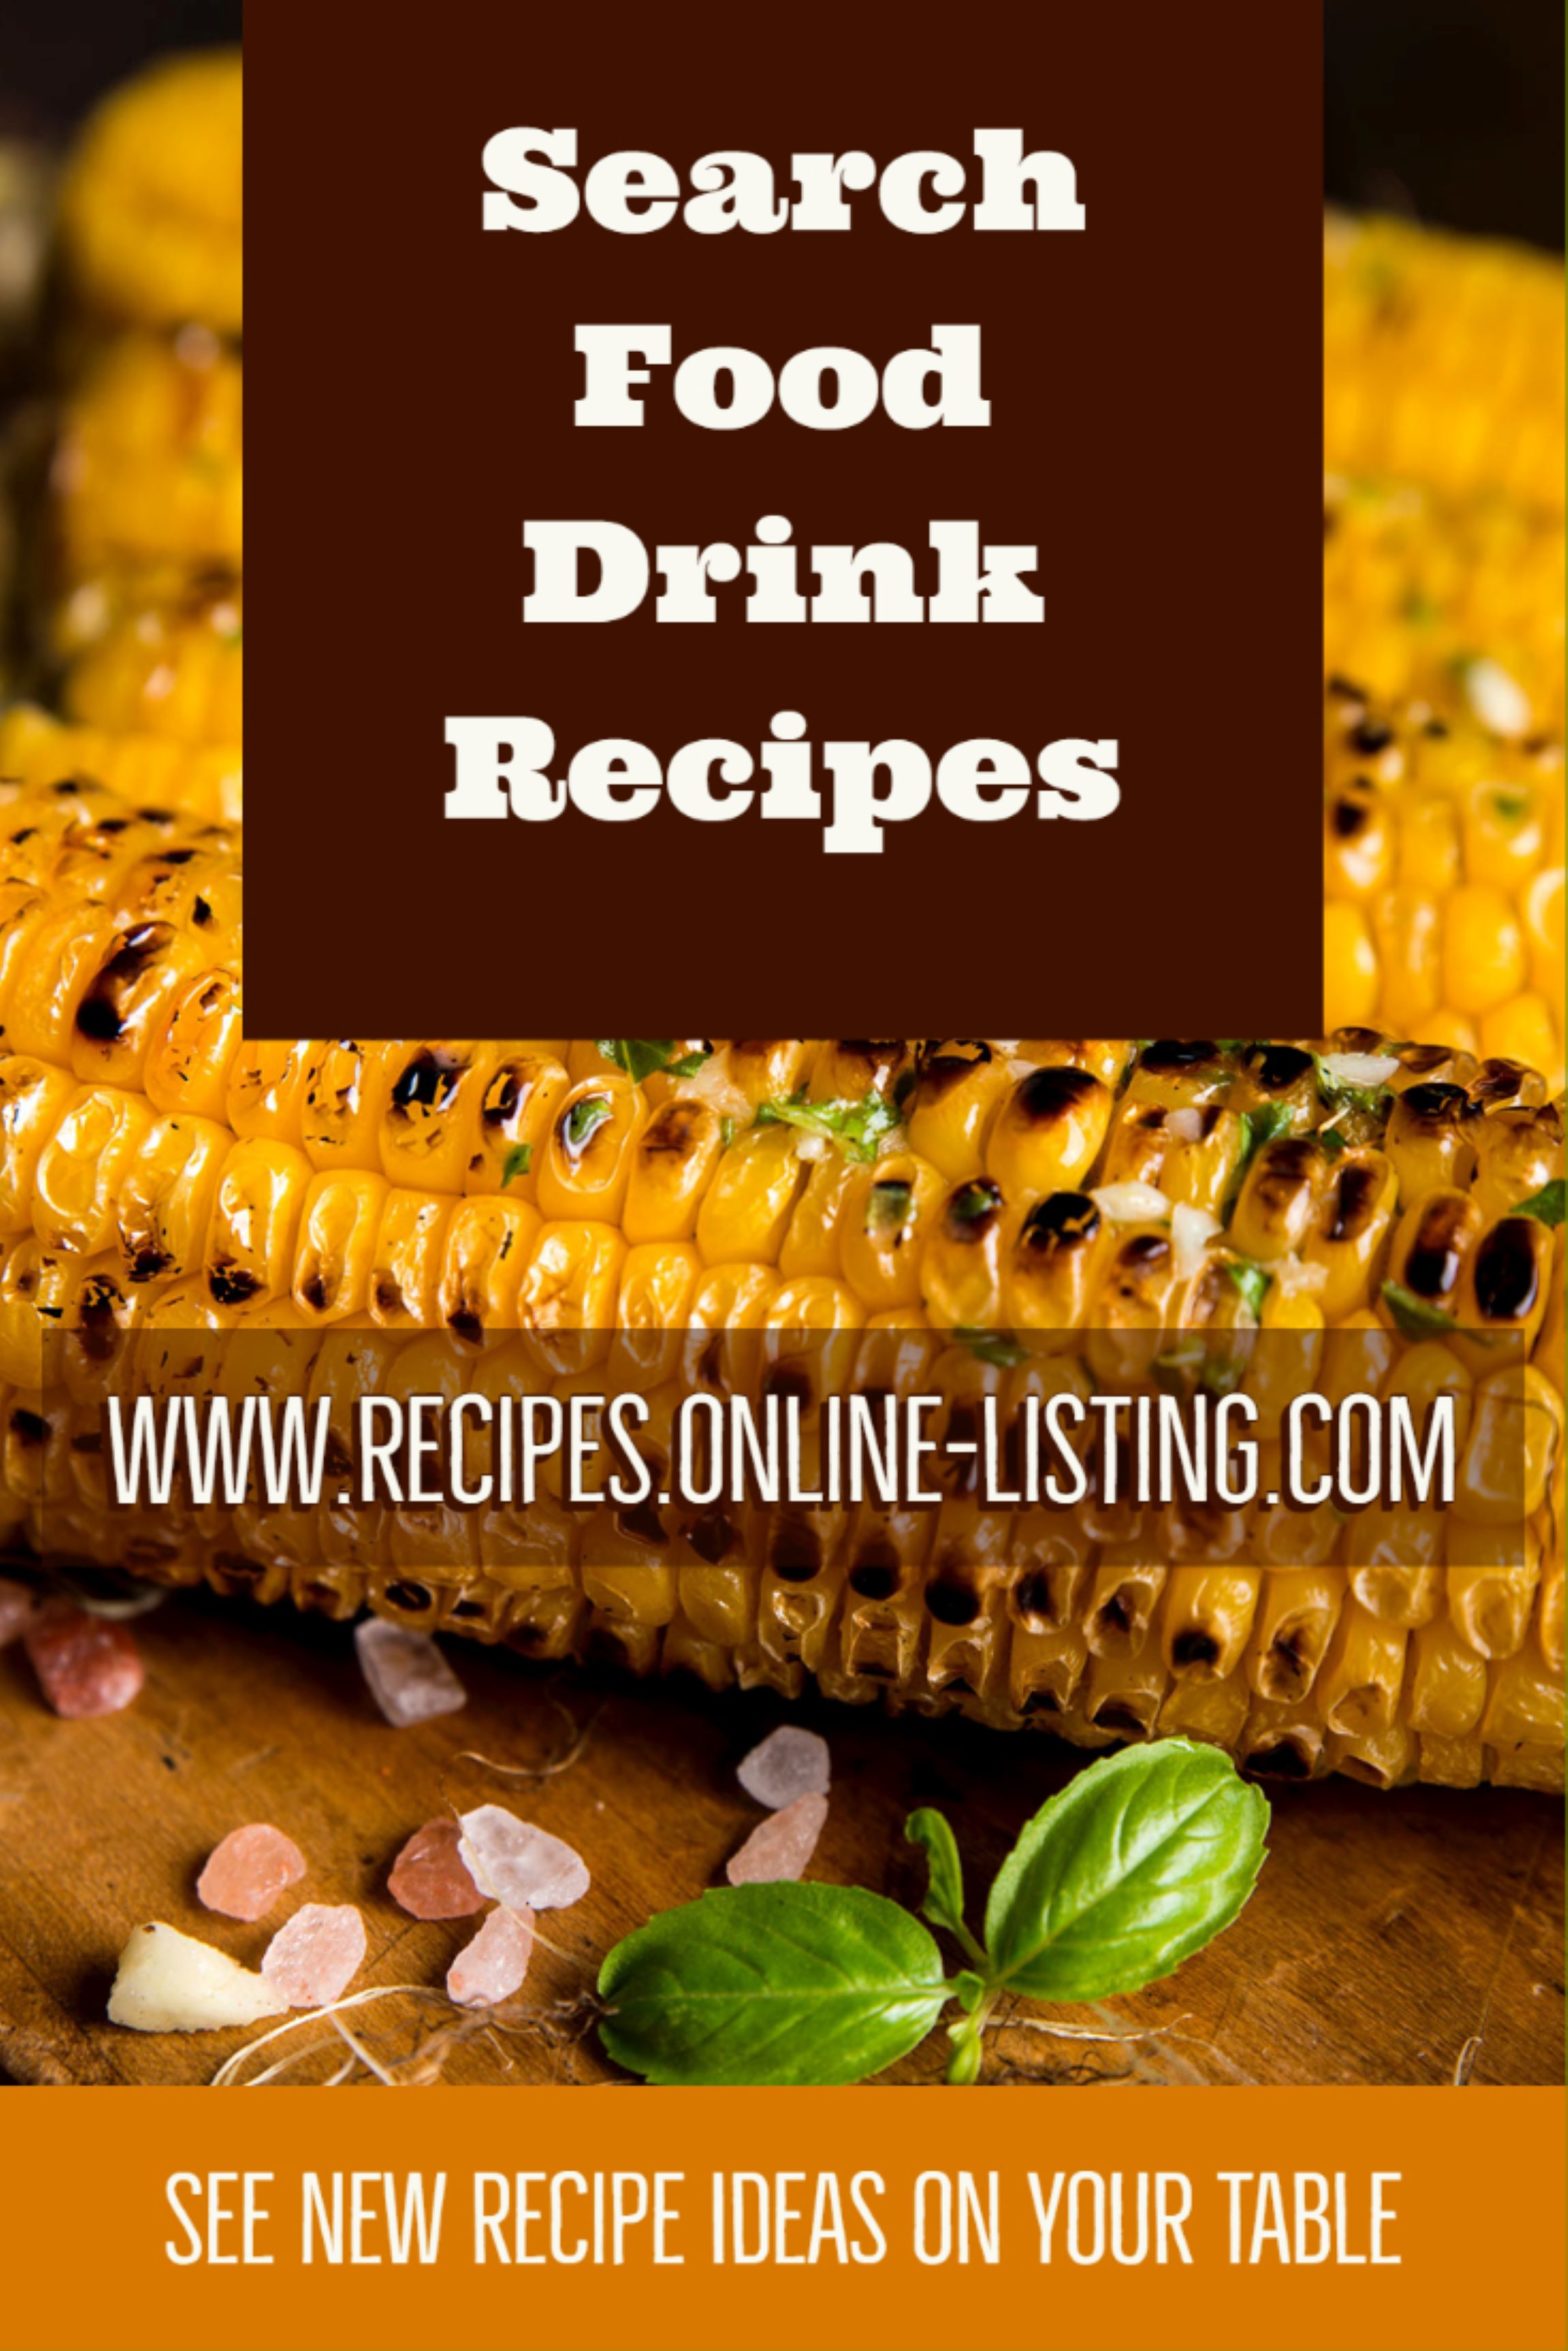 Food and Drink Recipes